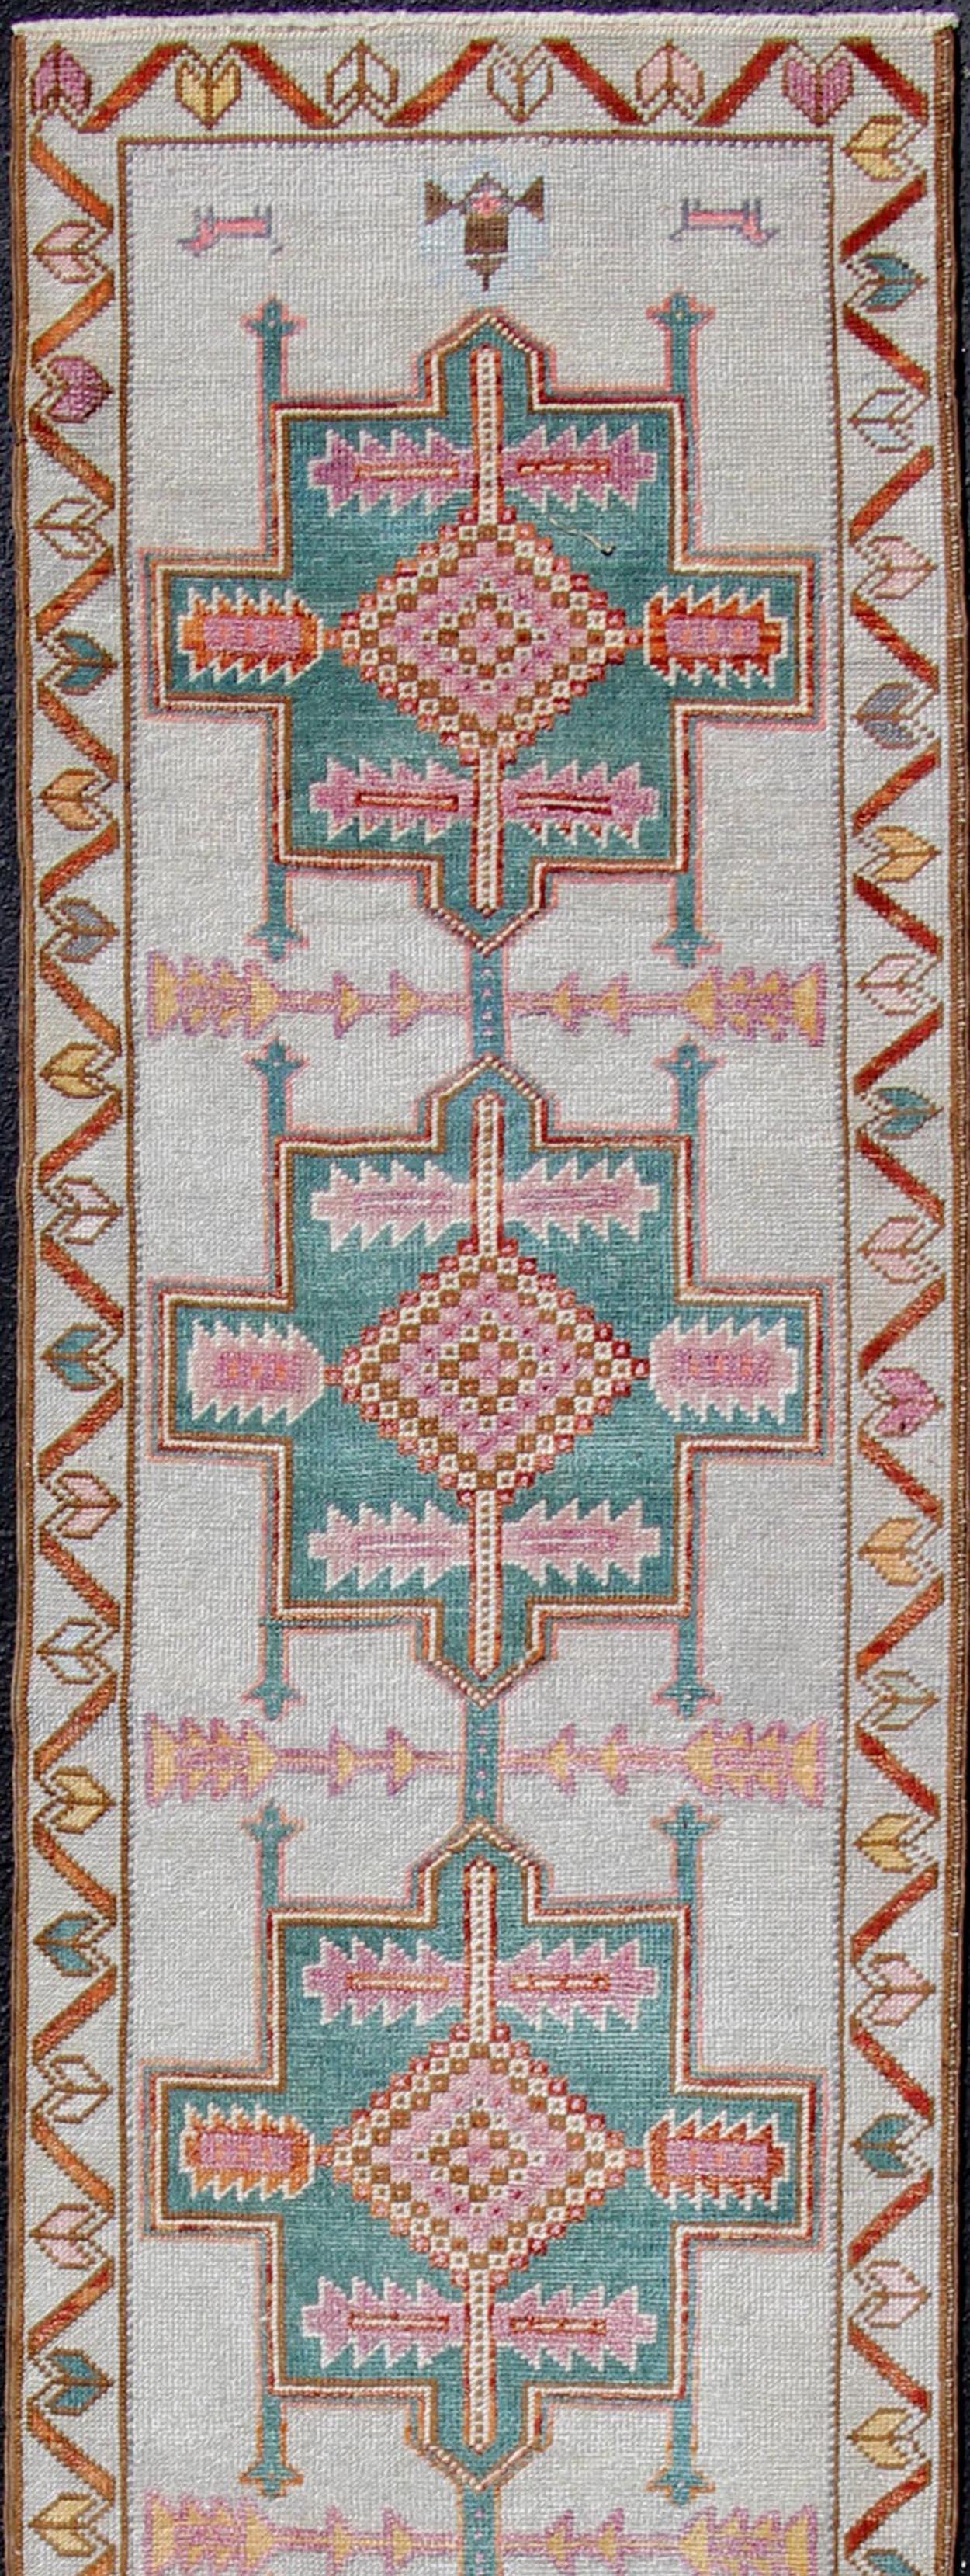 Colorful vintage Turkish oushak runner with repeating medallion geometric design in teal color design and cream background, rug/EN-179543, Keivan Woven Arts / country of origin / type: Turkey / Oushak, circa 1950

This vintage Oushak runner (circa